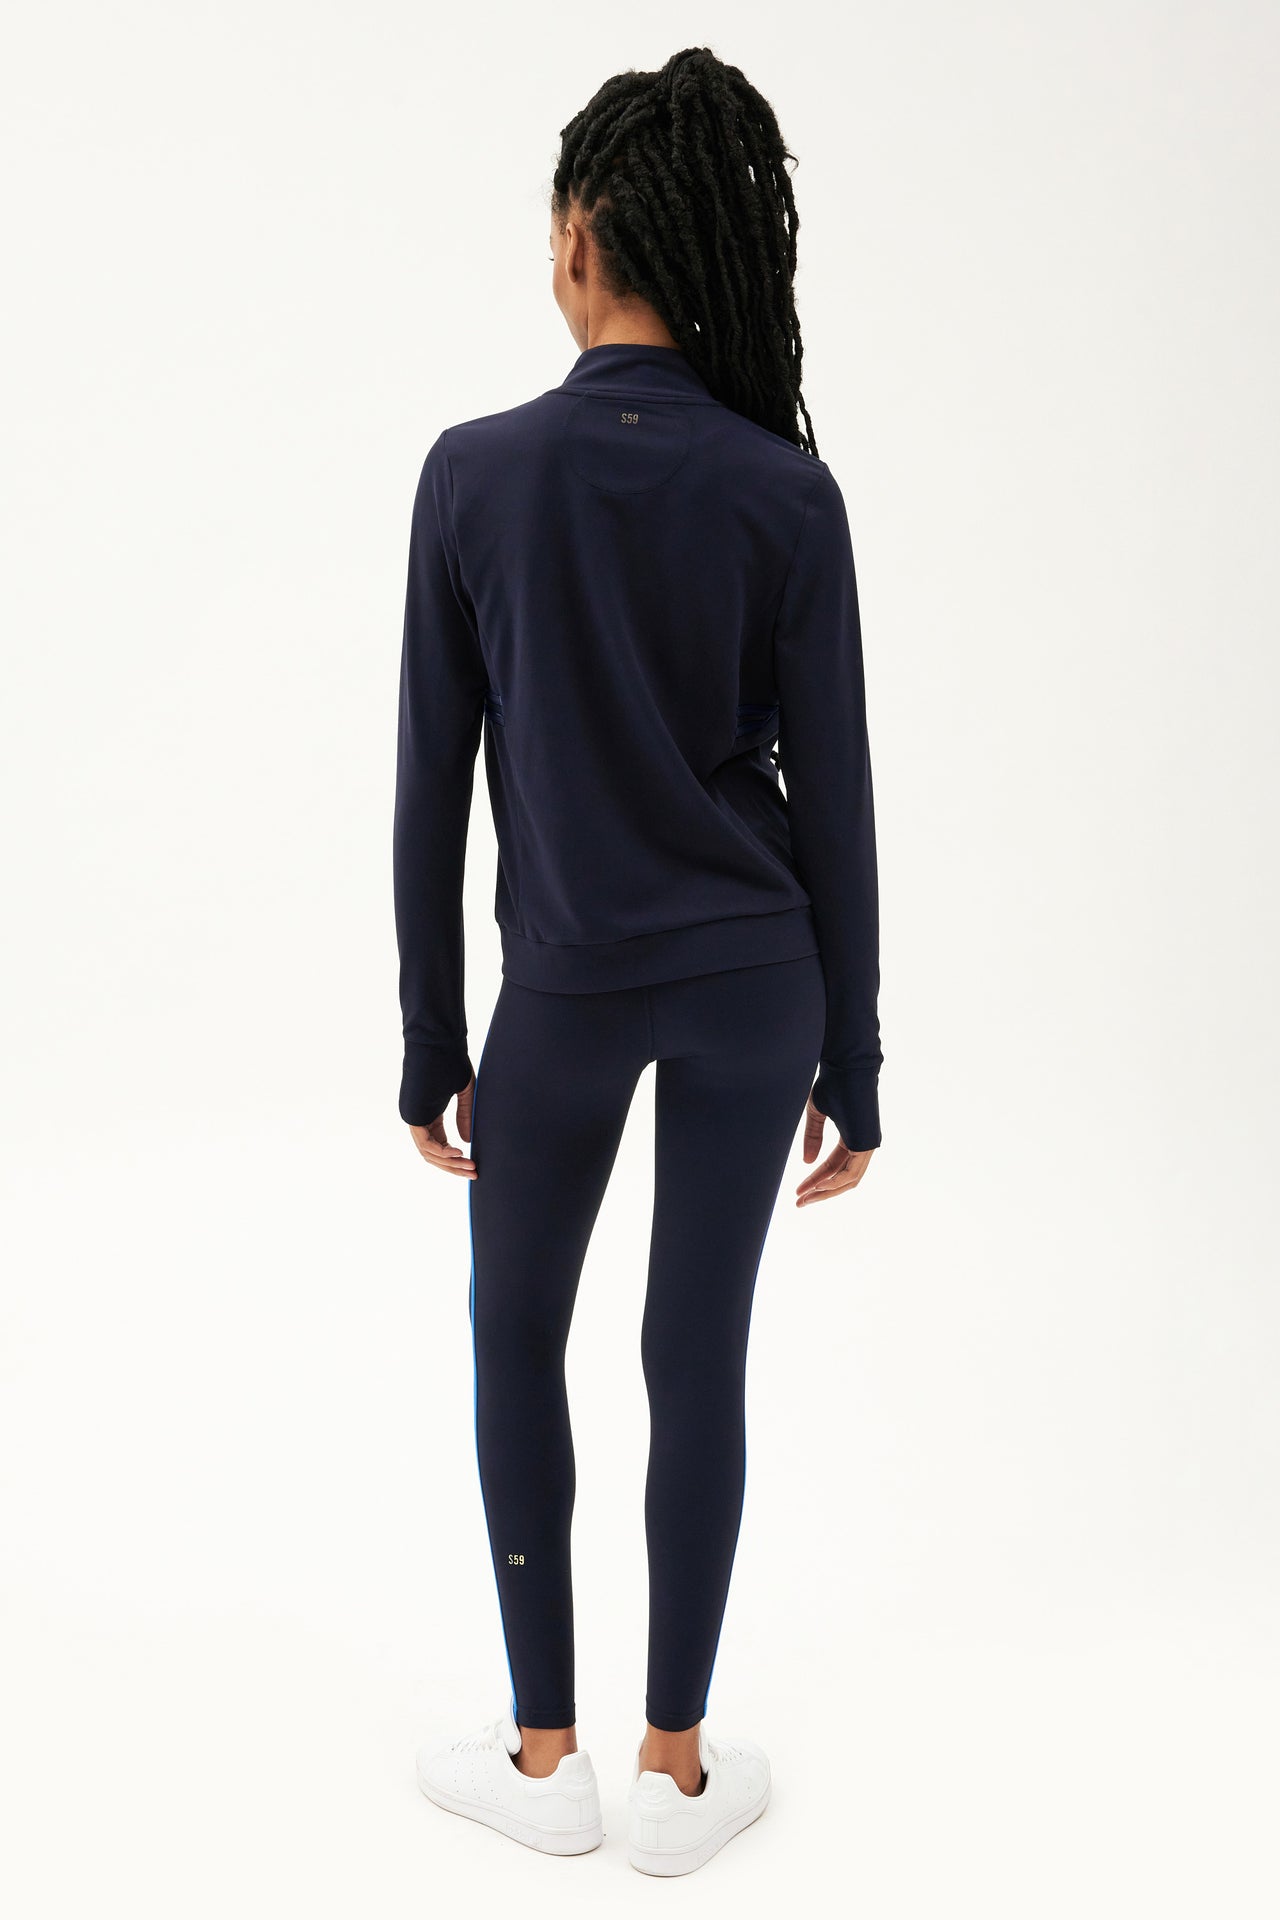 The back view of a woman wearing a SPLITS59 Rain Airweight Jacket in Indigo and sleek leggings designed for hot yoga.